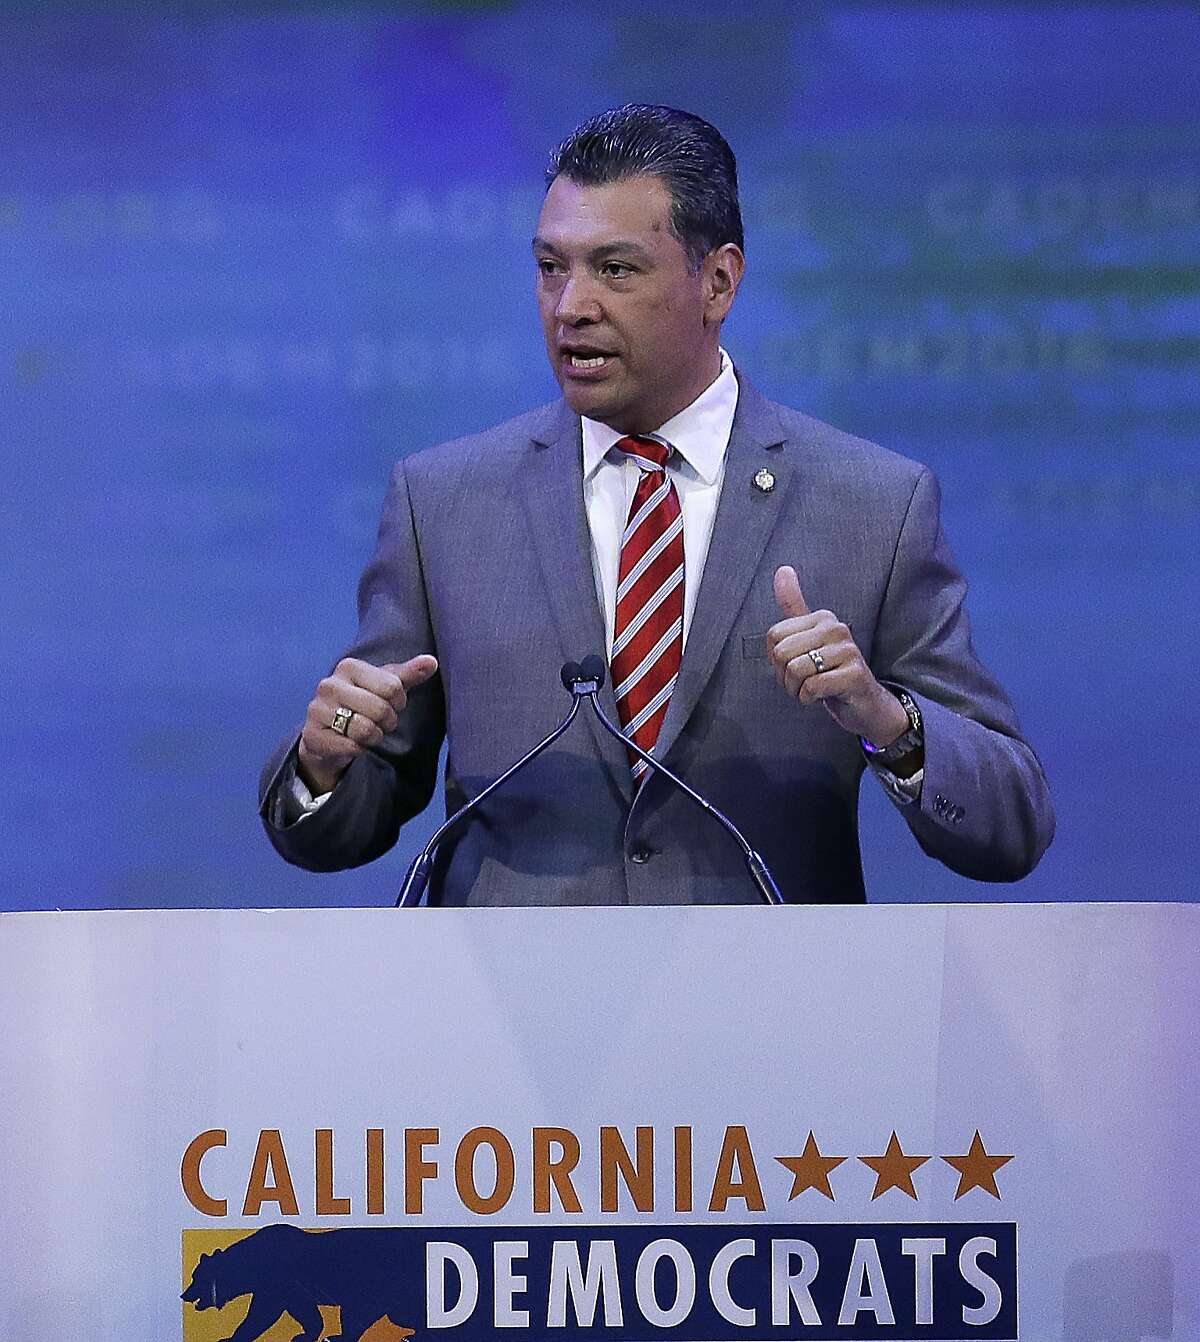 In this Saturday, Feb. 27, 2016, photo California Secretary of State Alex Padilla gestures while speaking before the California Democrats State Convention in San Jose, Calif. �There�s no other fundamental right we have as citizens that requires you to register or fill out a form,� said Padilla, who advocated for a California legislation for automatic registration bills. (AP Photo/Ben Margot)